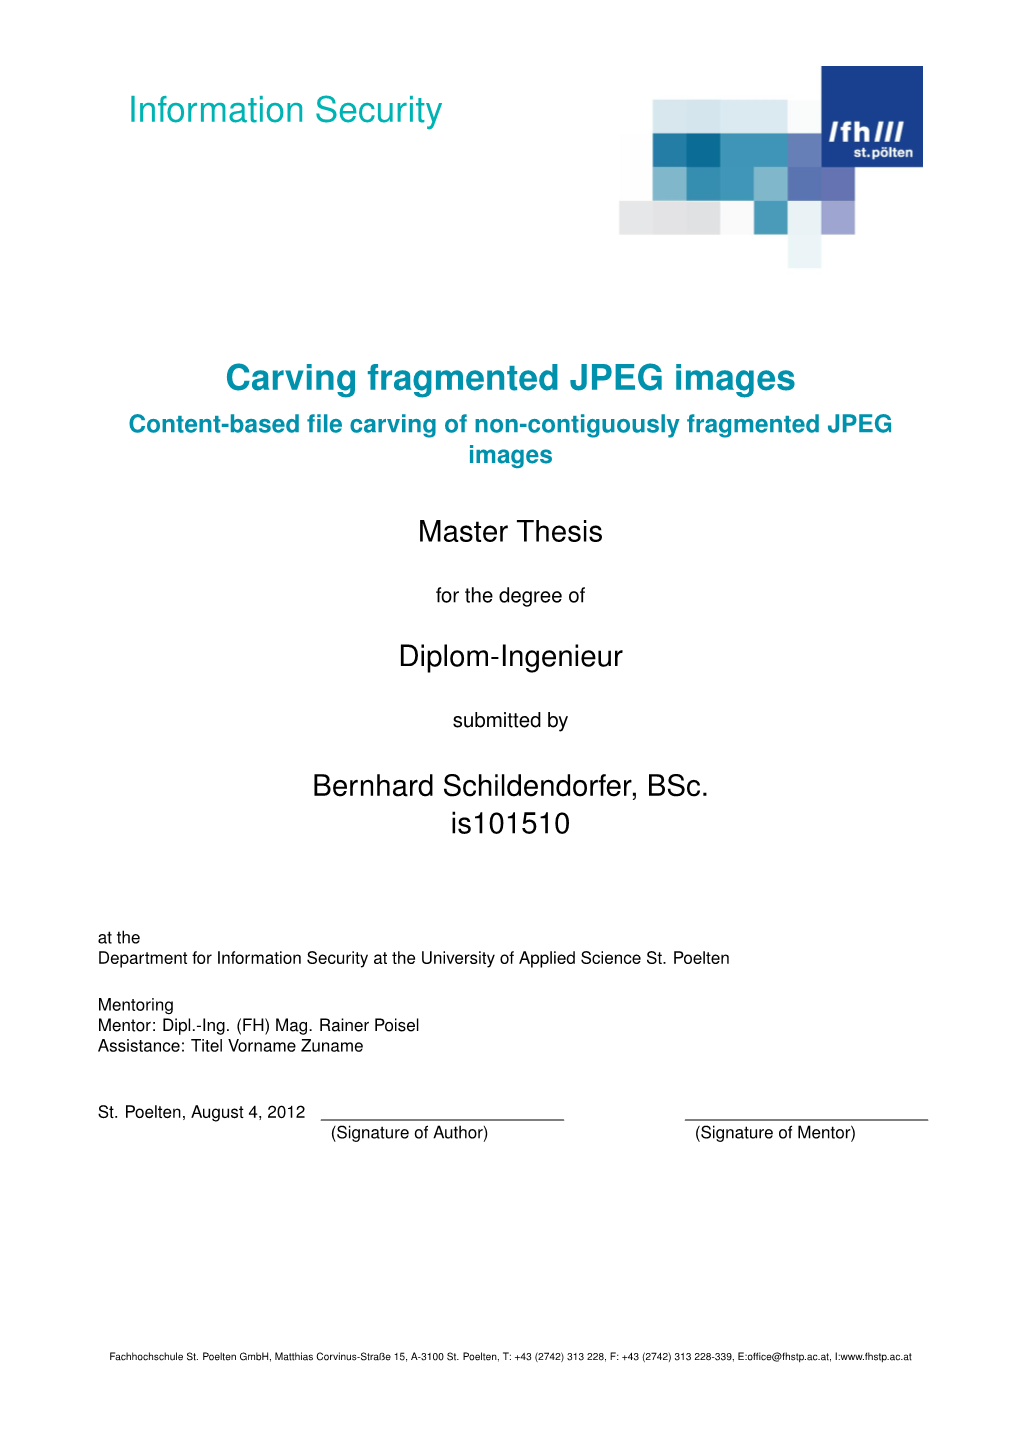 Carving Fragmented JPEG Images Content-Based ﬁle Carving of Non-Contiguously Fragmented JPEG Images